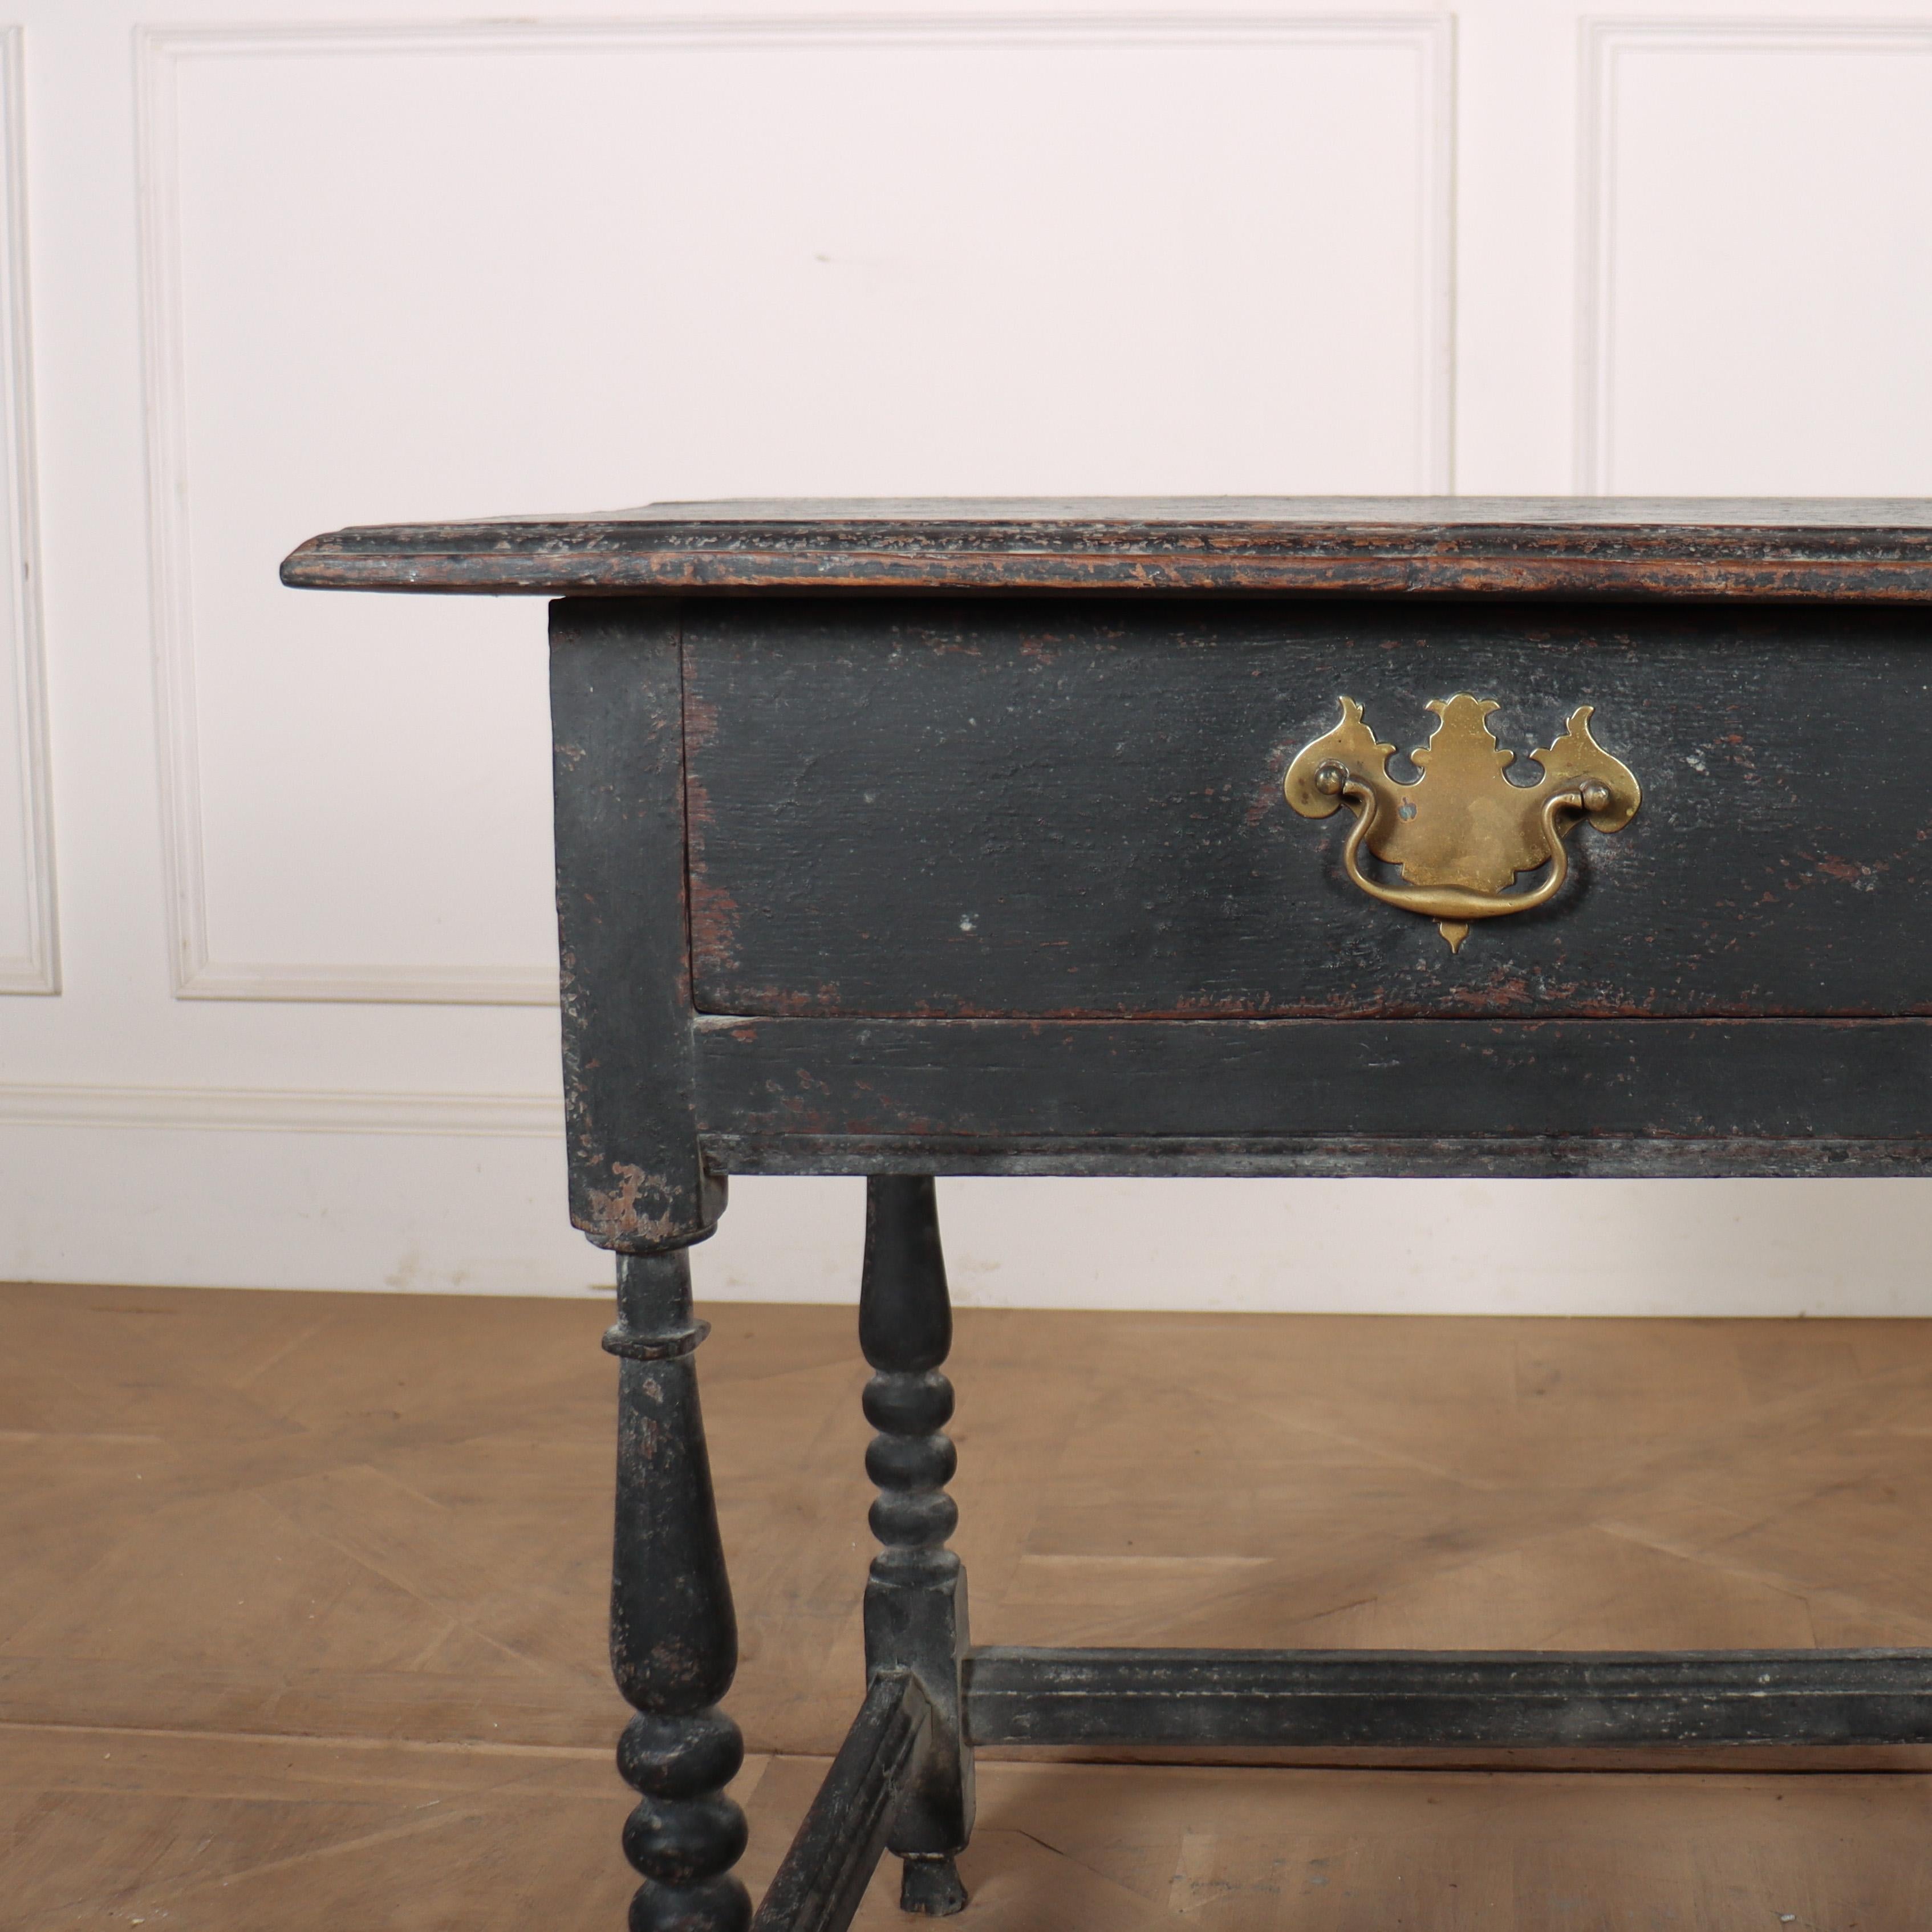 18th C English one drawer painted lamp table with ballister turned legs. 1760.

Reference: 8294

Dimensions
30 inches (76 cms) Wide
23.5 inches (60 cms) Deep
28 inches (71 cms) High